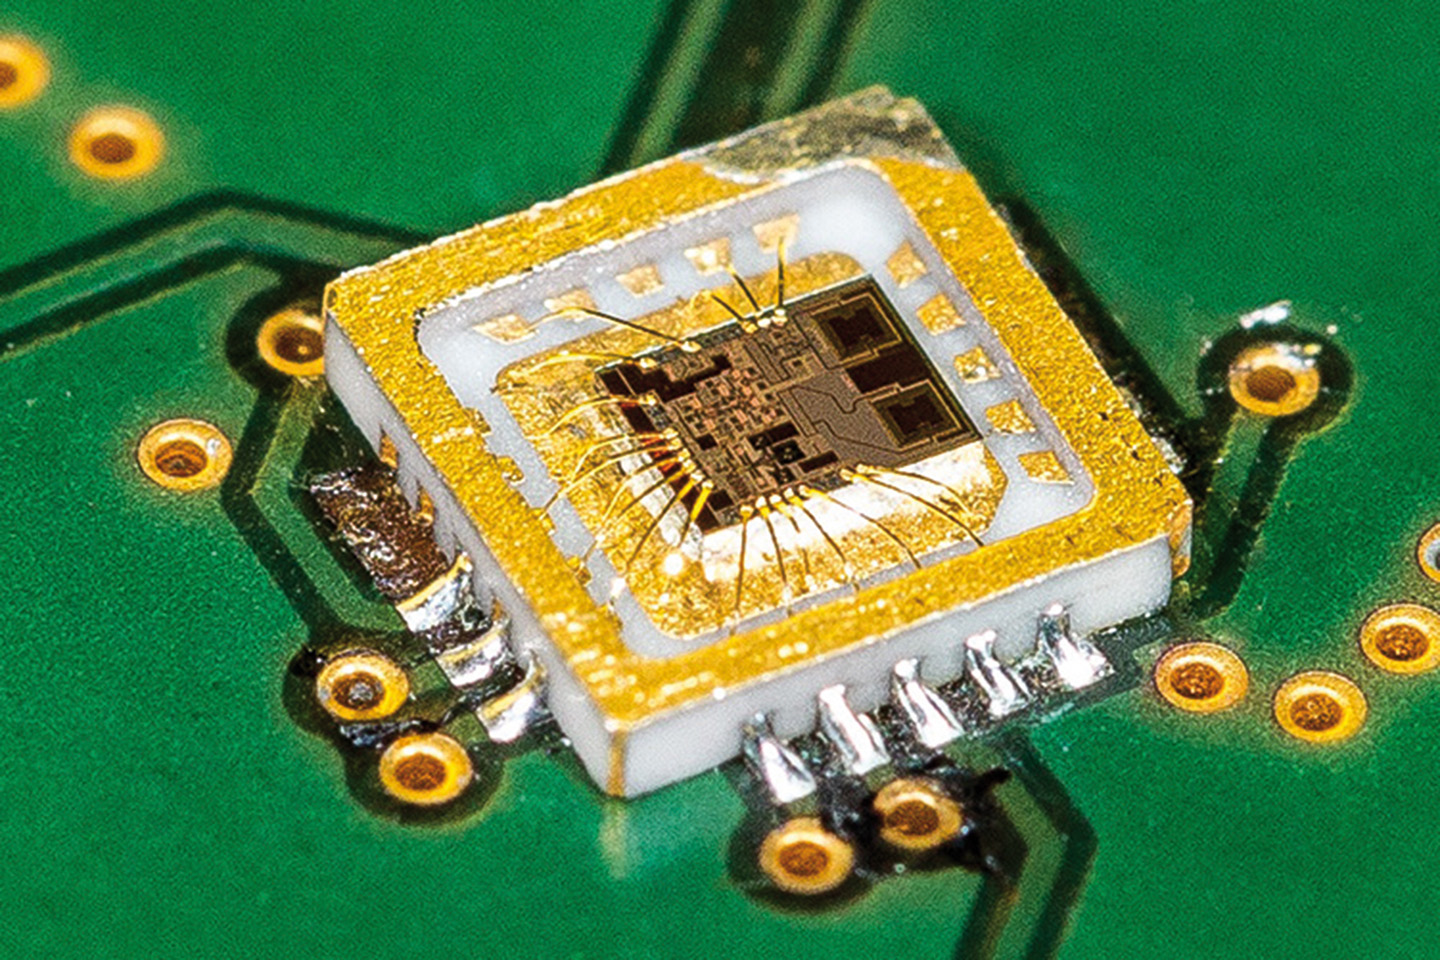 The radar chip in an open QFN package, which is mounted on an FR4 board. 